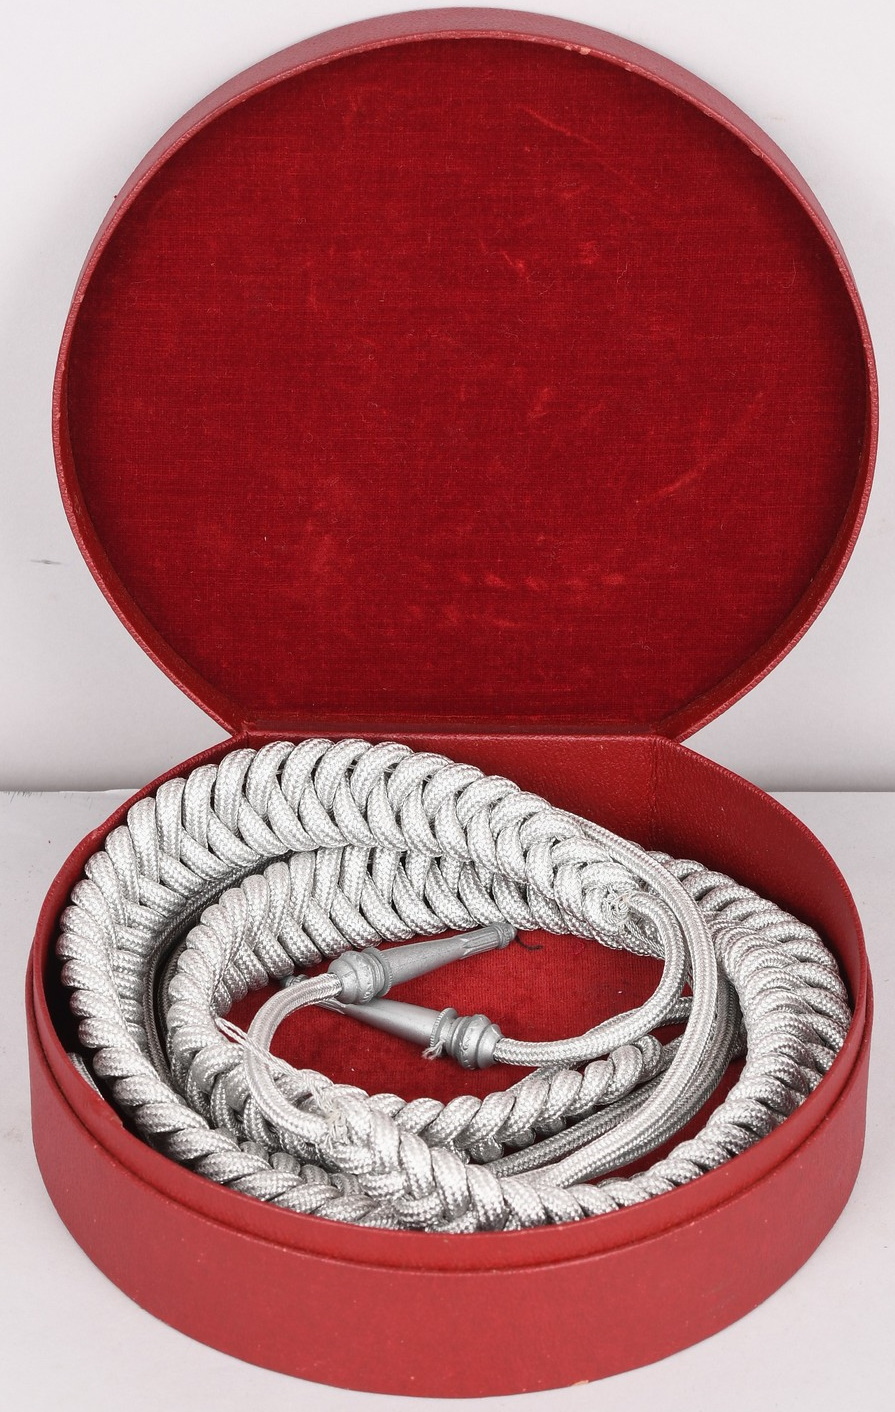 Heer Officer's Uniform Aiguillette With Factory Box